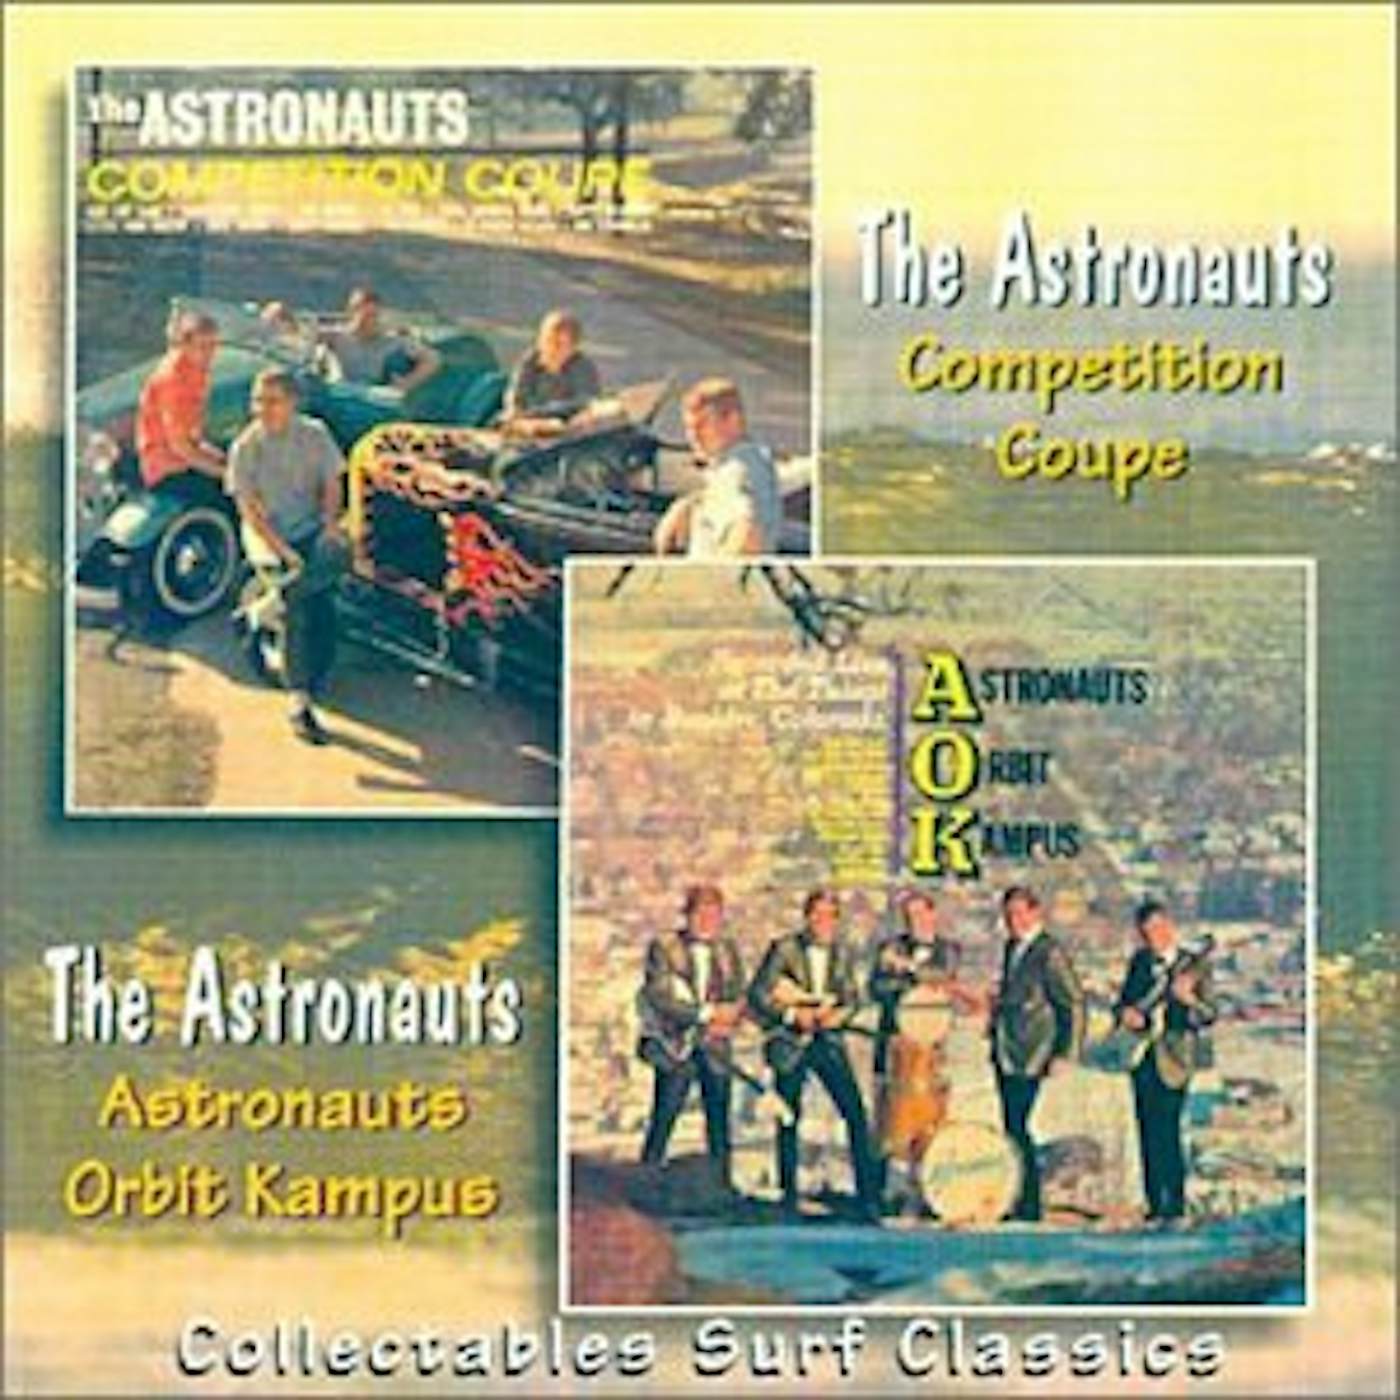 The Astronauts COMPETITION COUPE / ORBIT CAMPUS CD